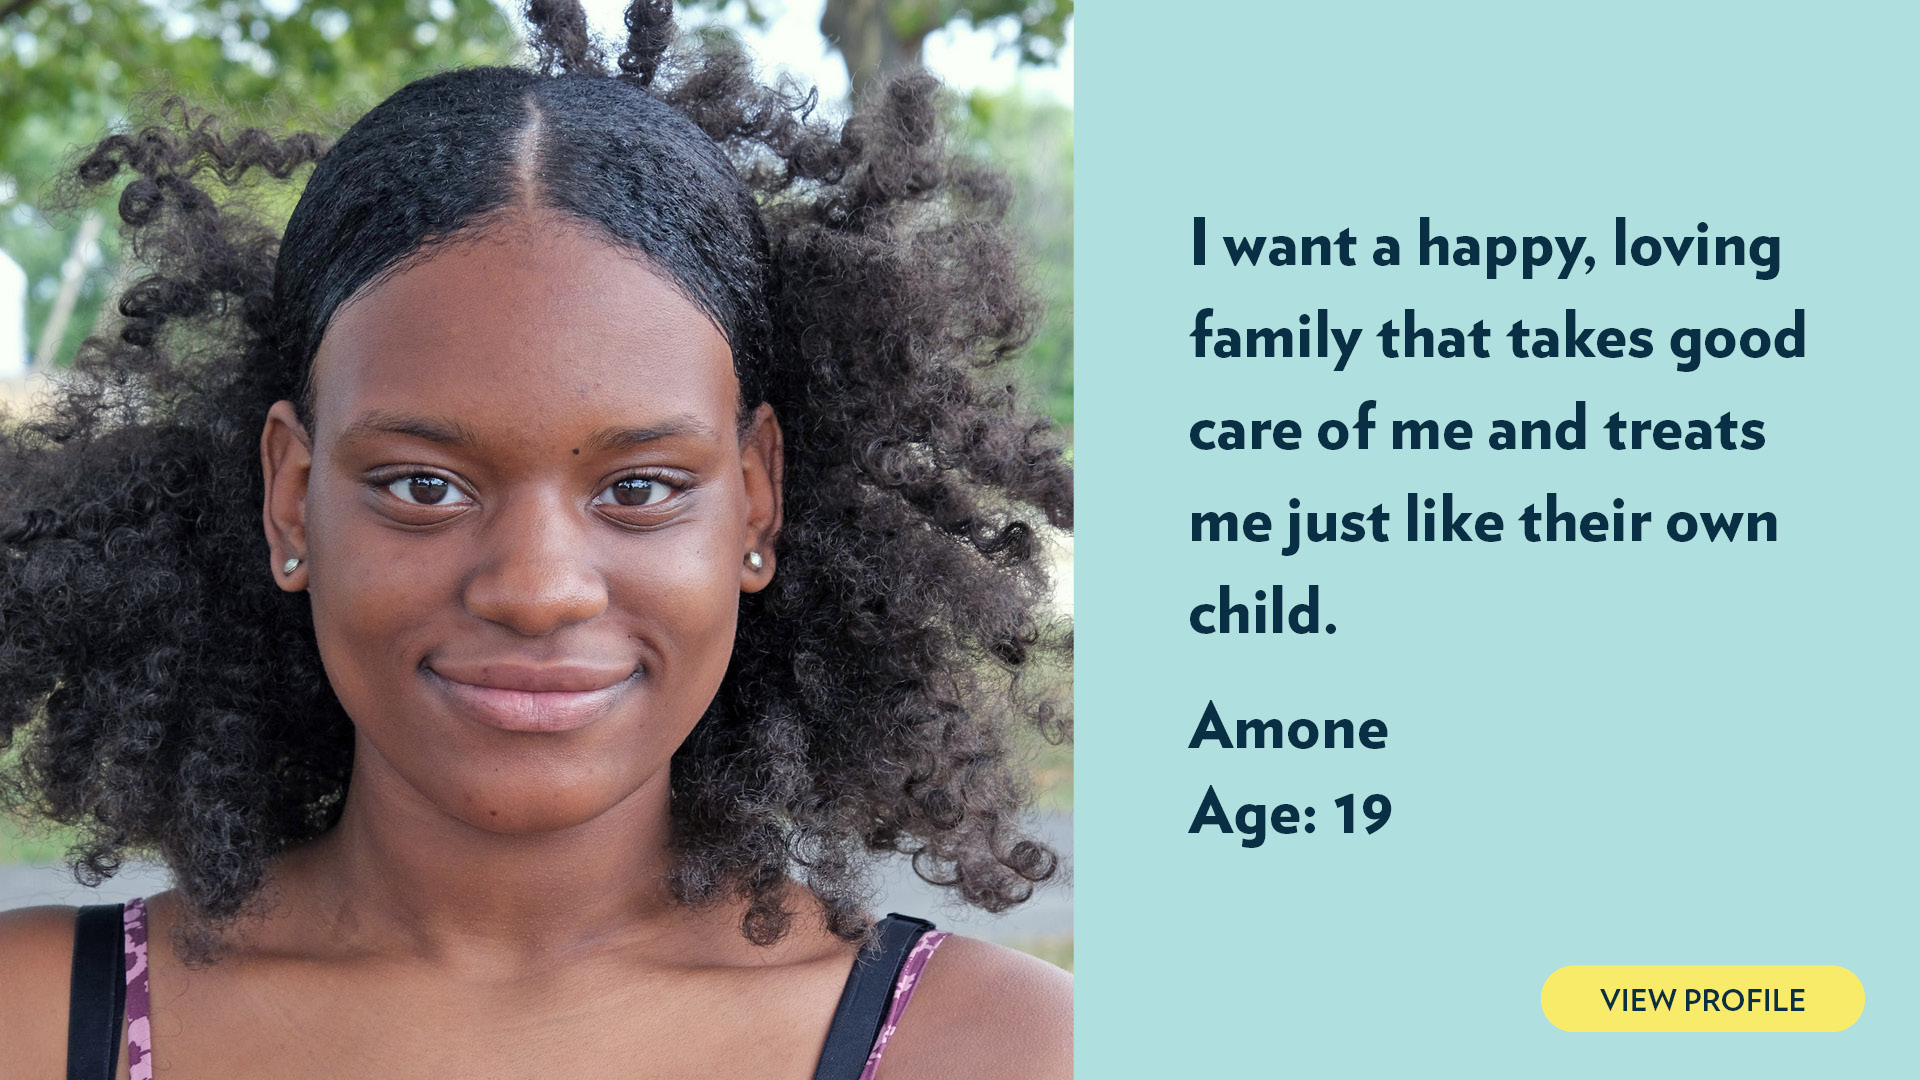 Amone, age 19. I want a happy, loving family that takes good care of me and treats me just like their own child. View profile.